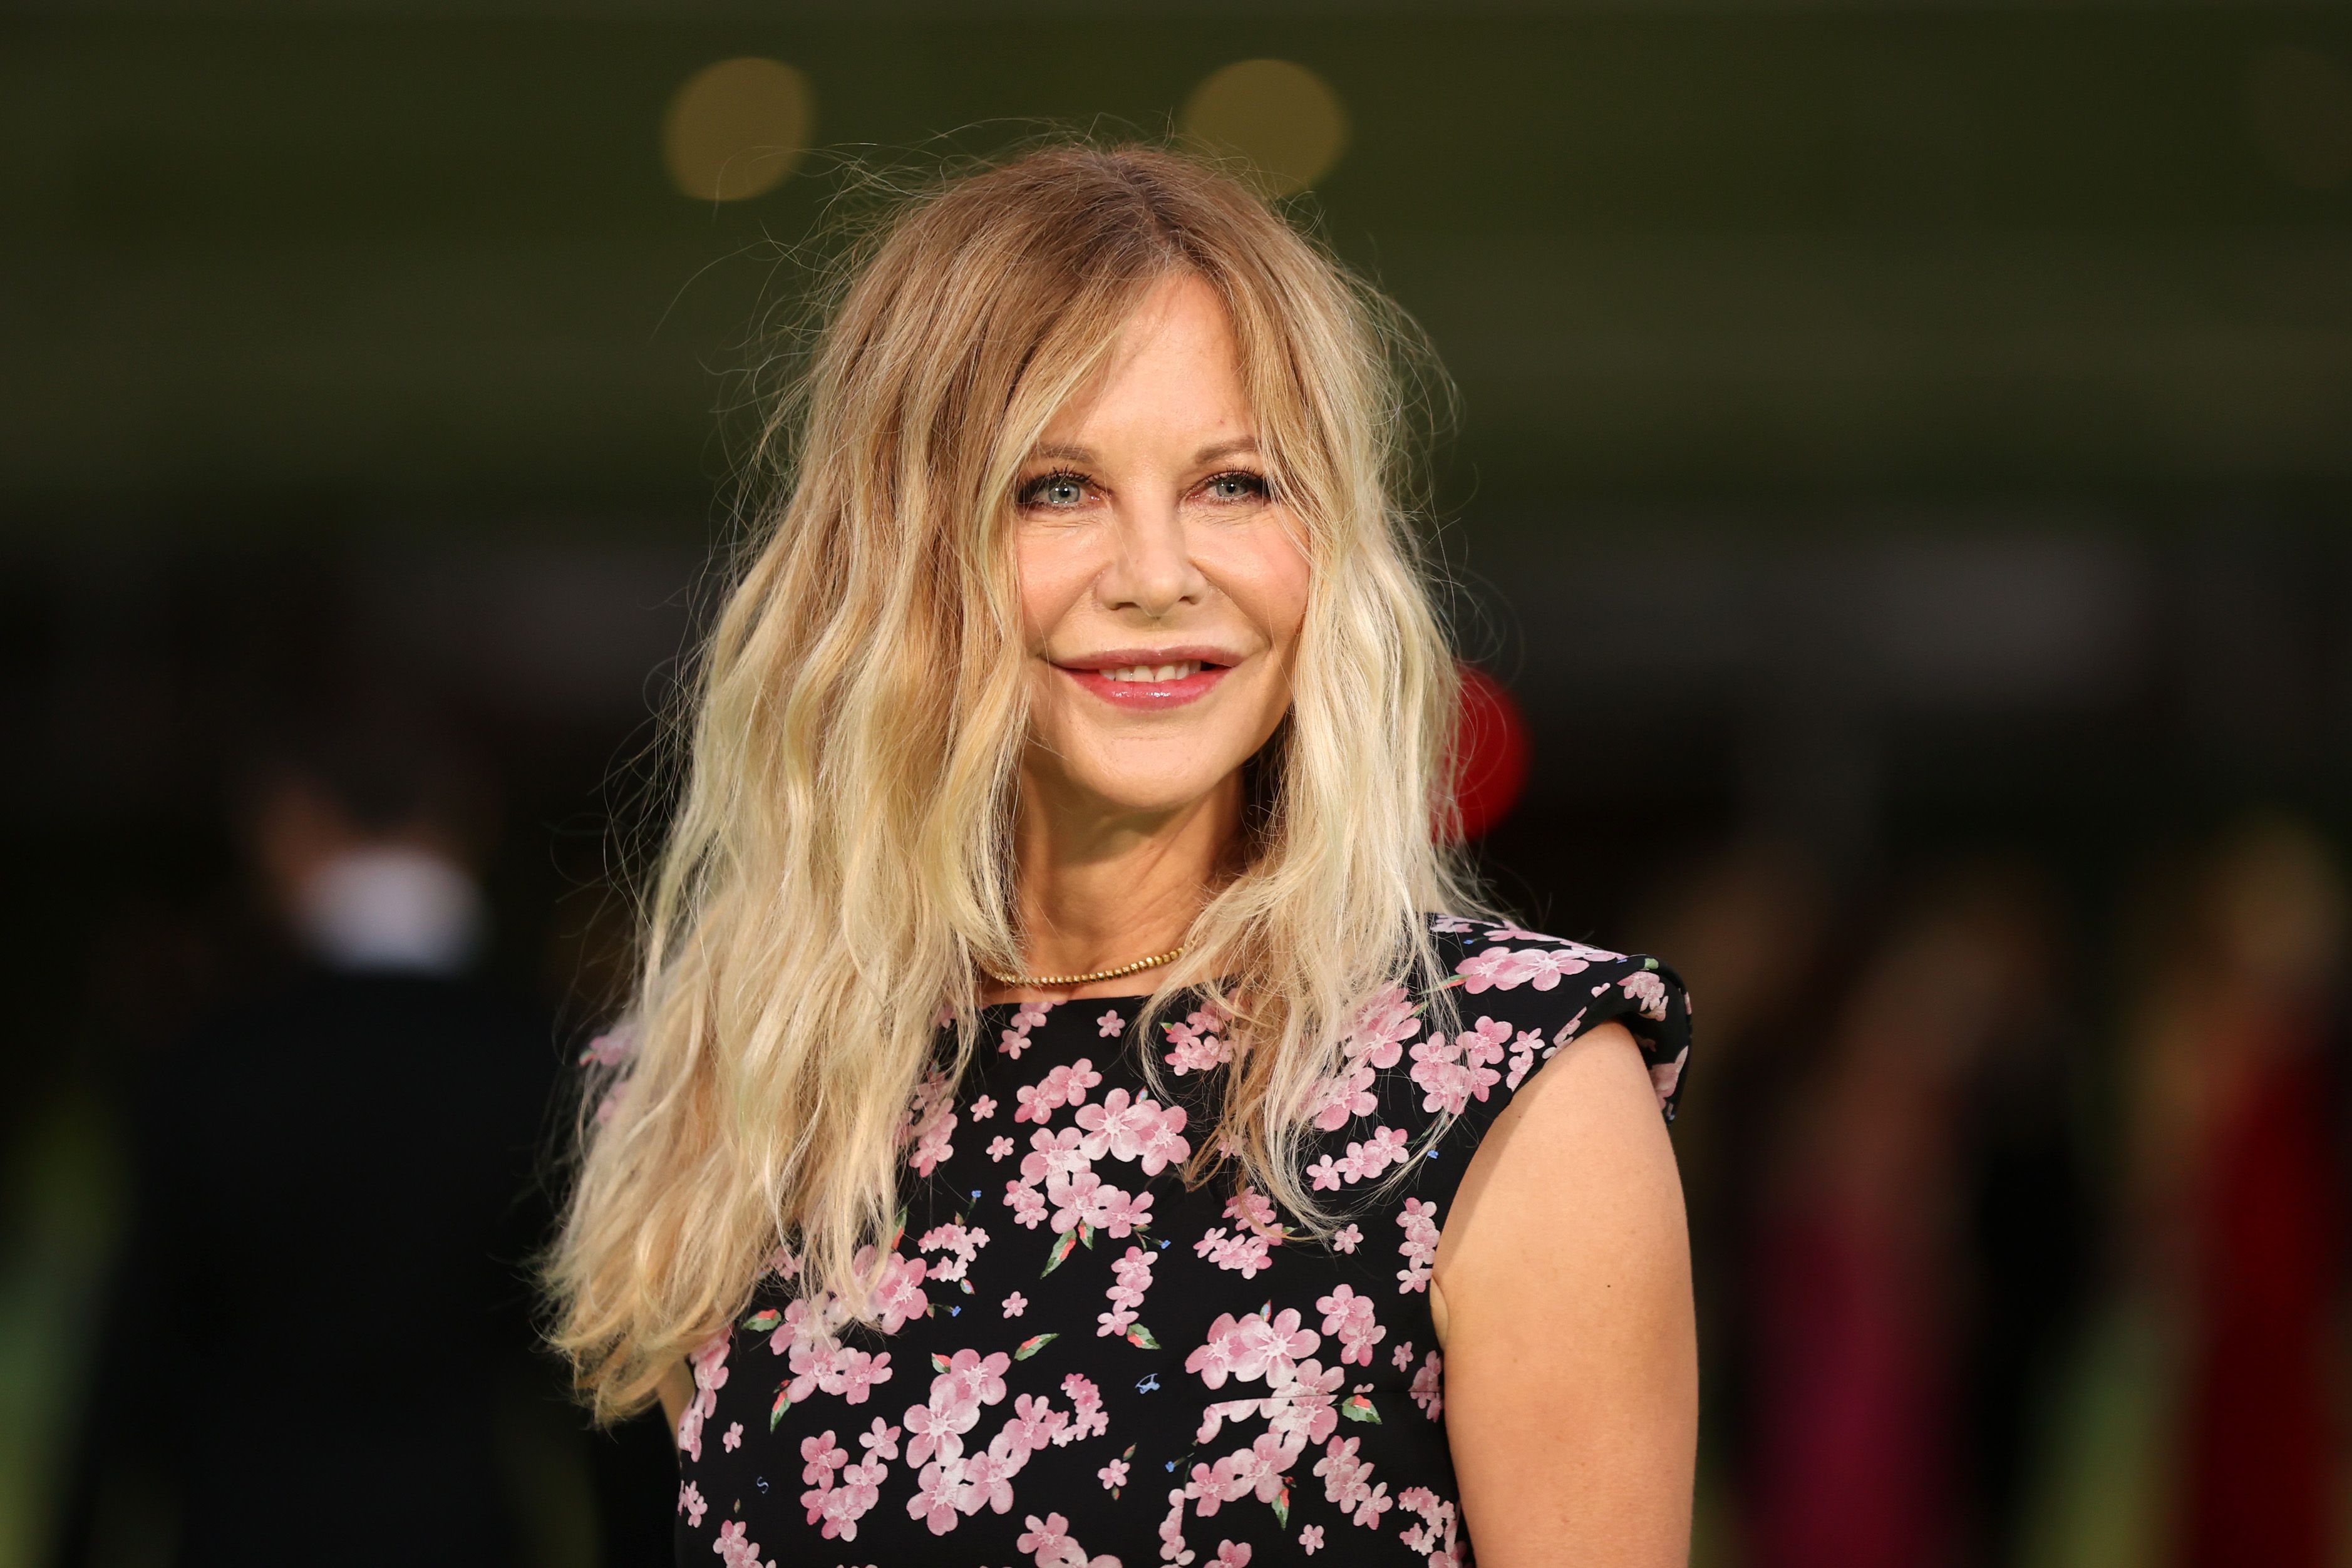 Meg Ryan at The Academy Museum of Motion Pictures Opening Gala on September 25, 2021, in Los Angeles, California. | Source: Amy Sussman/Getty Images